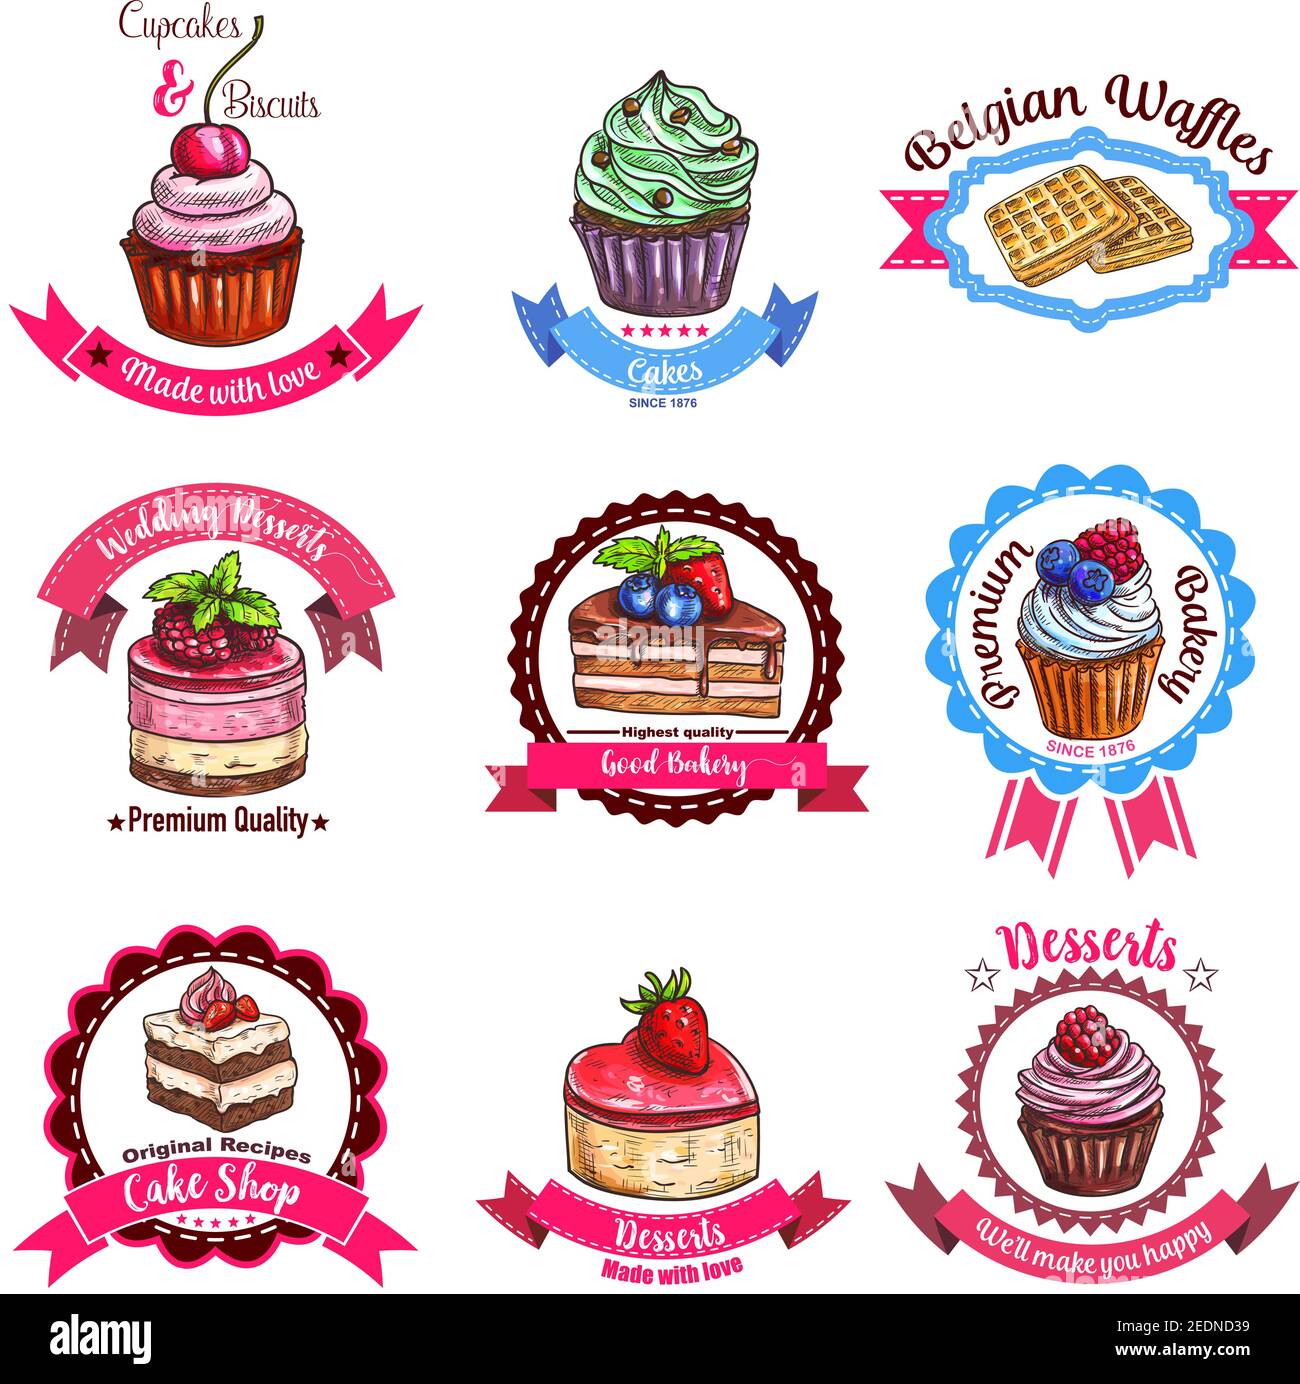 Cakes and dessert biscuits vector sketch icons of cupcakes or cheesecake, donut and muffin, belgian waffles and wafer tart, chocolate brownie cookie a Stock Vector